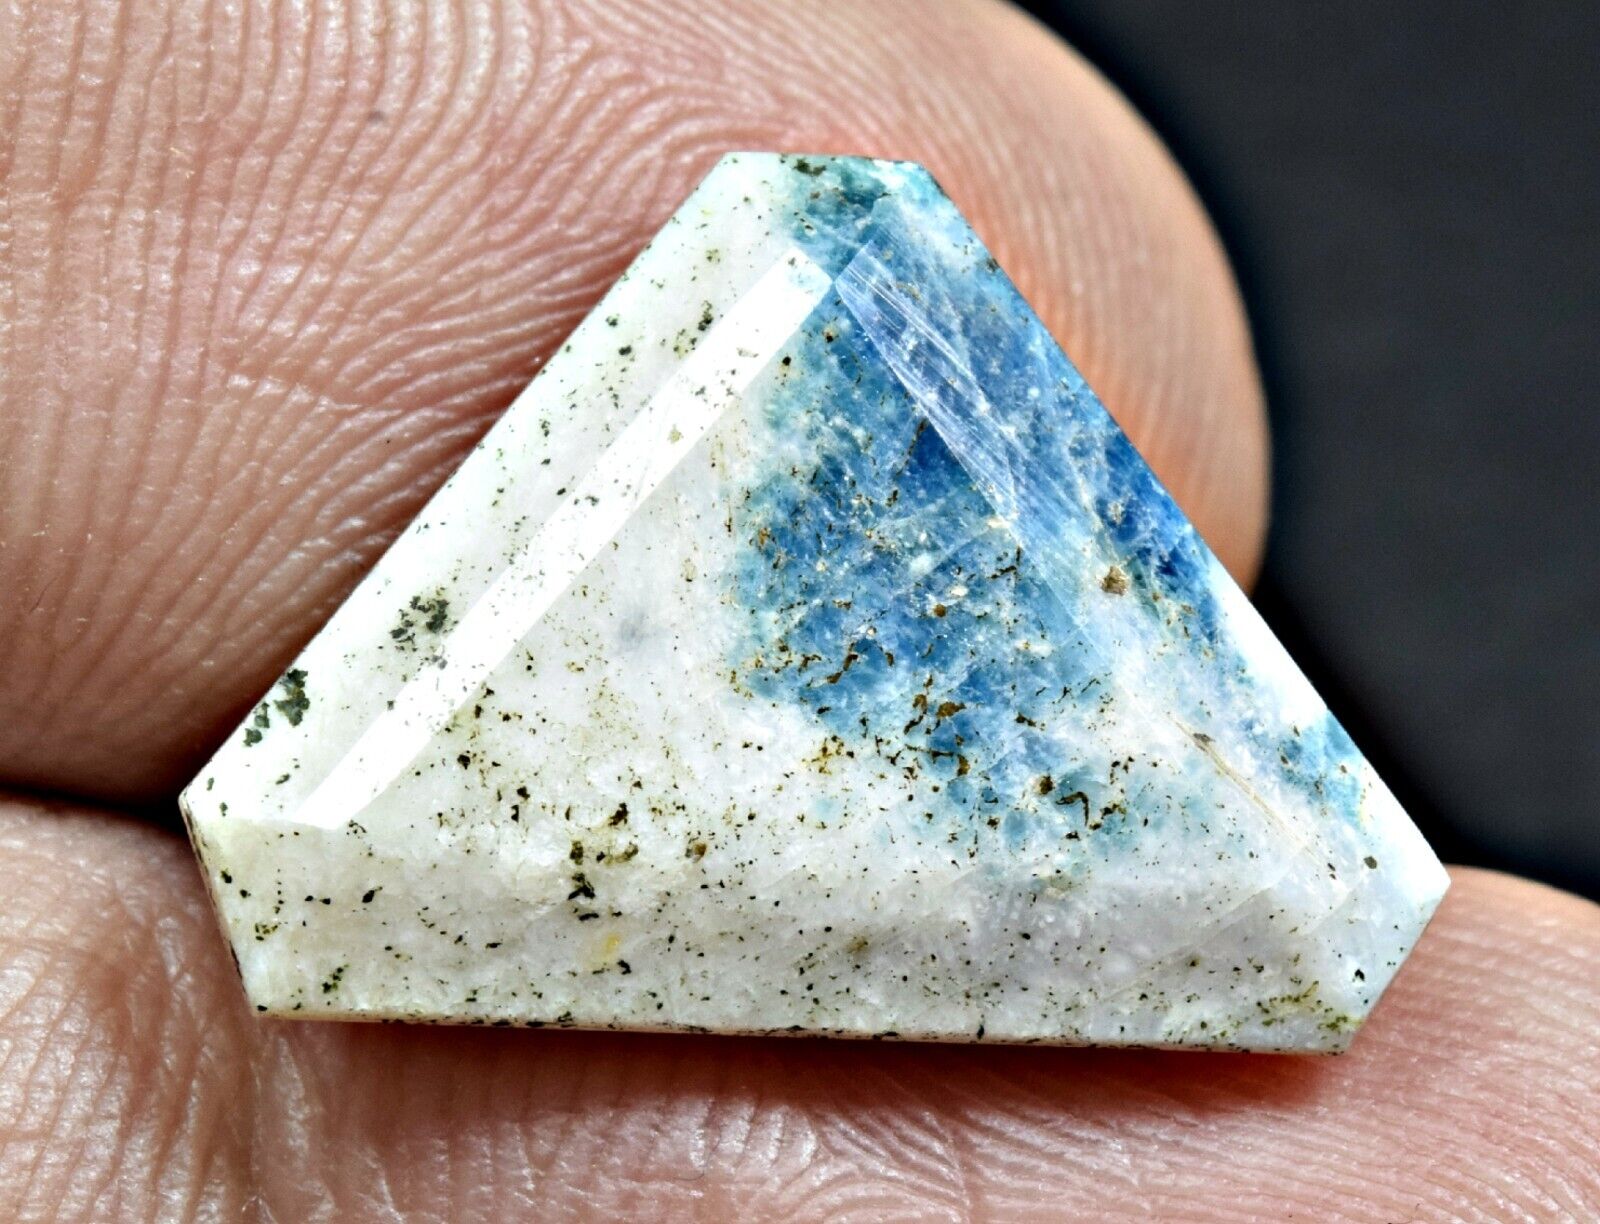 7.5 Carat Faceted Gonnardite Cut Gemstone W/Fluorescent Sodalite From Afghanista